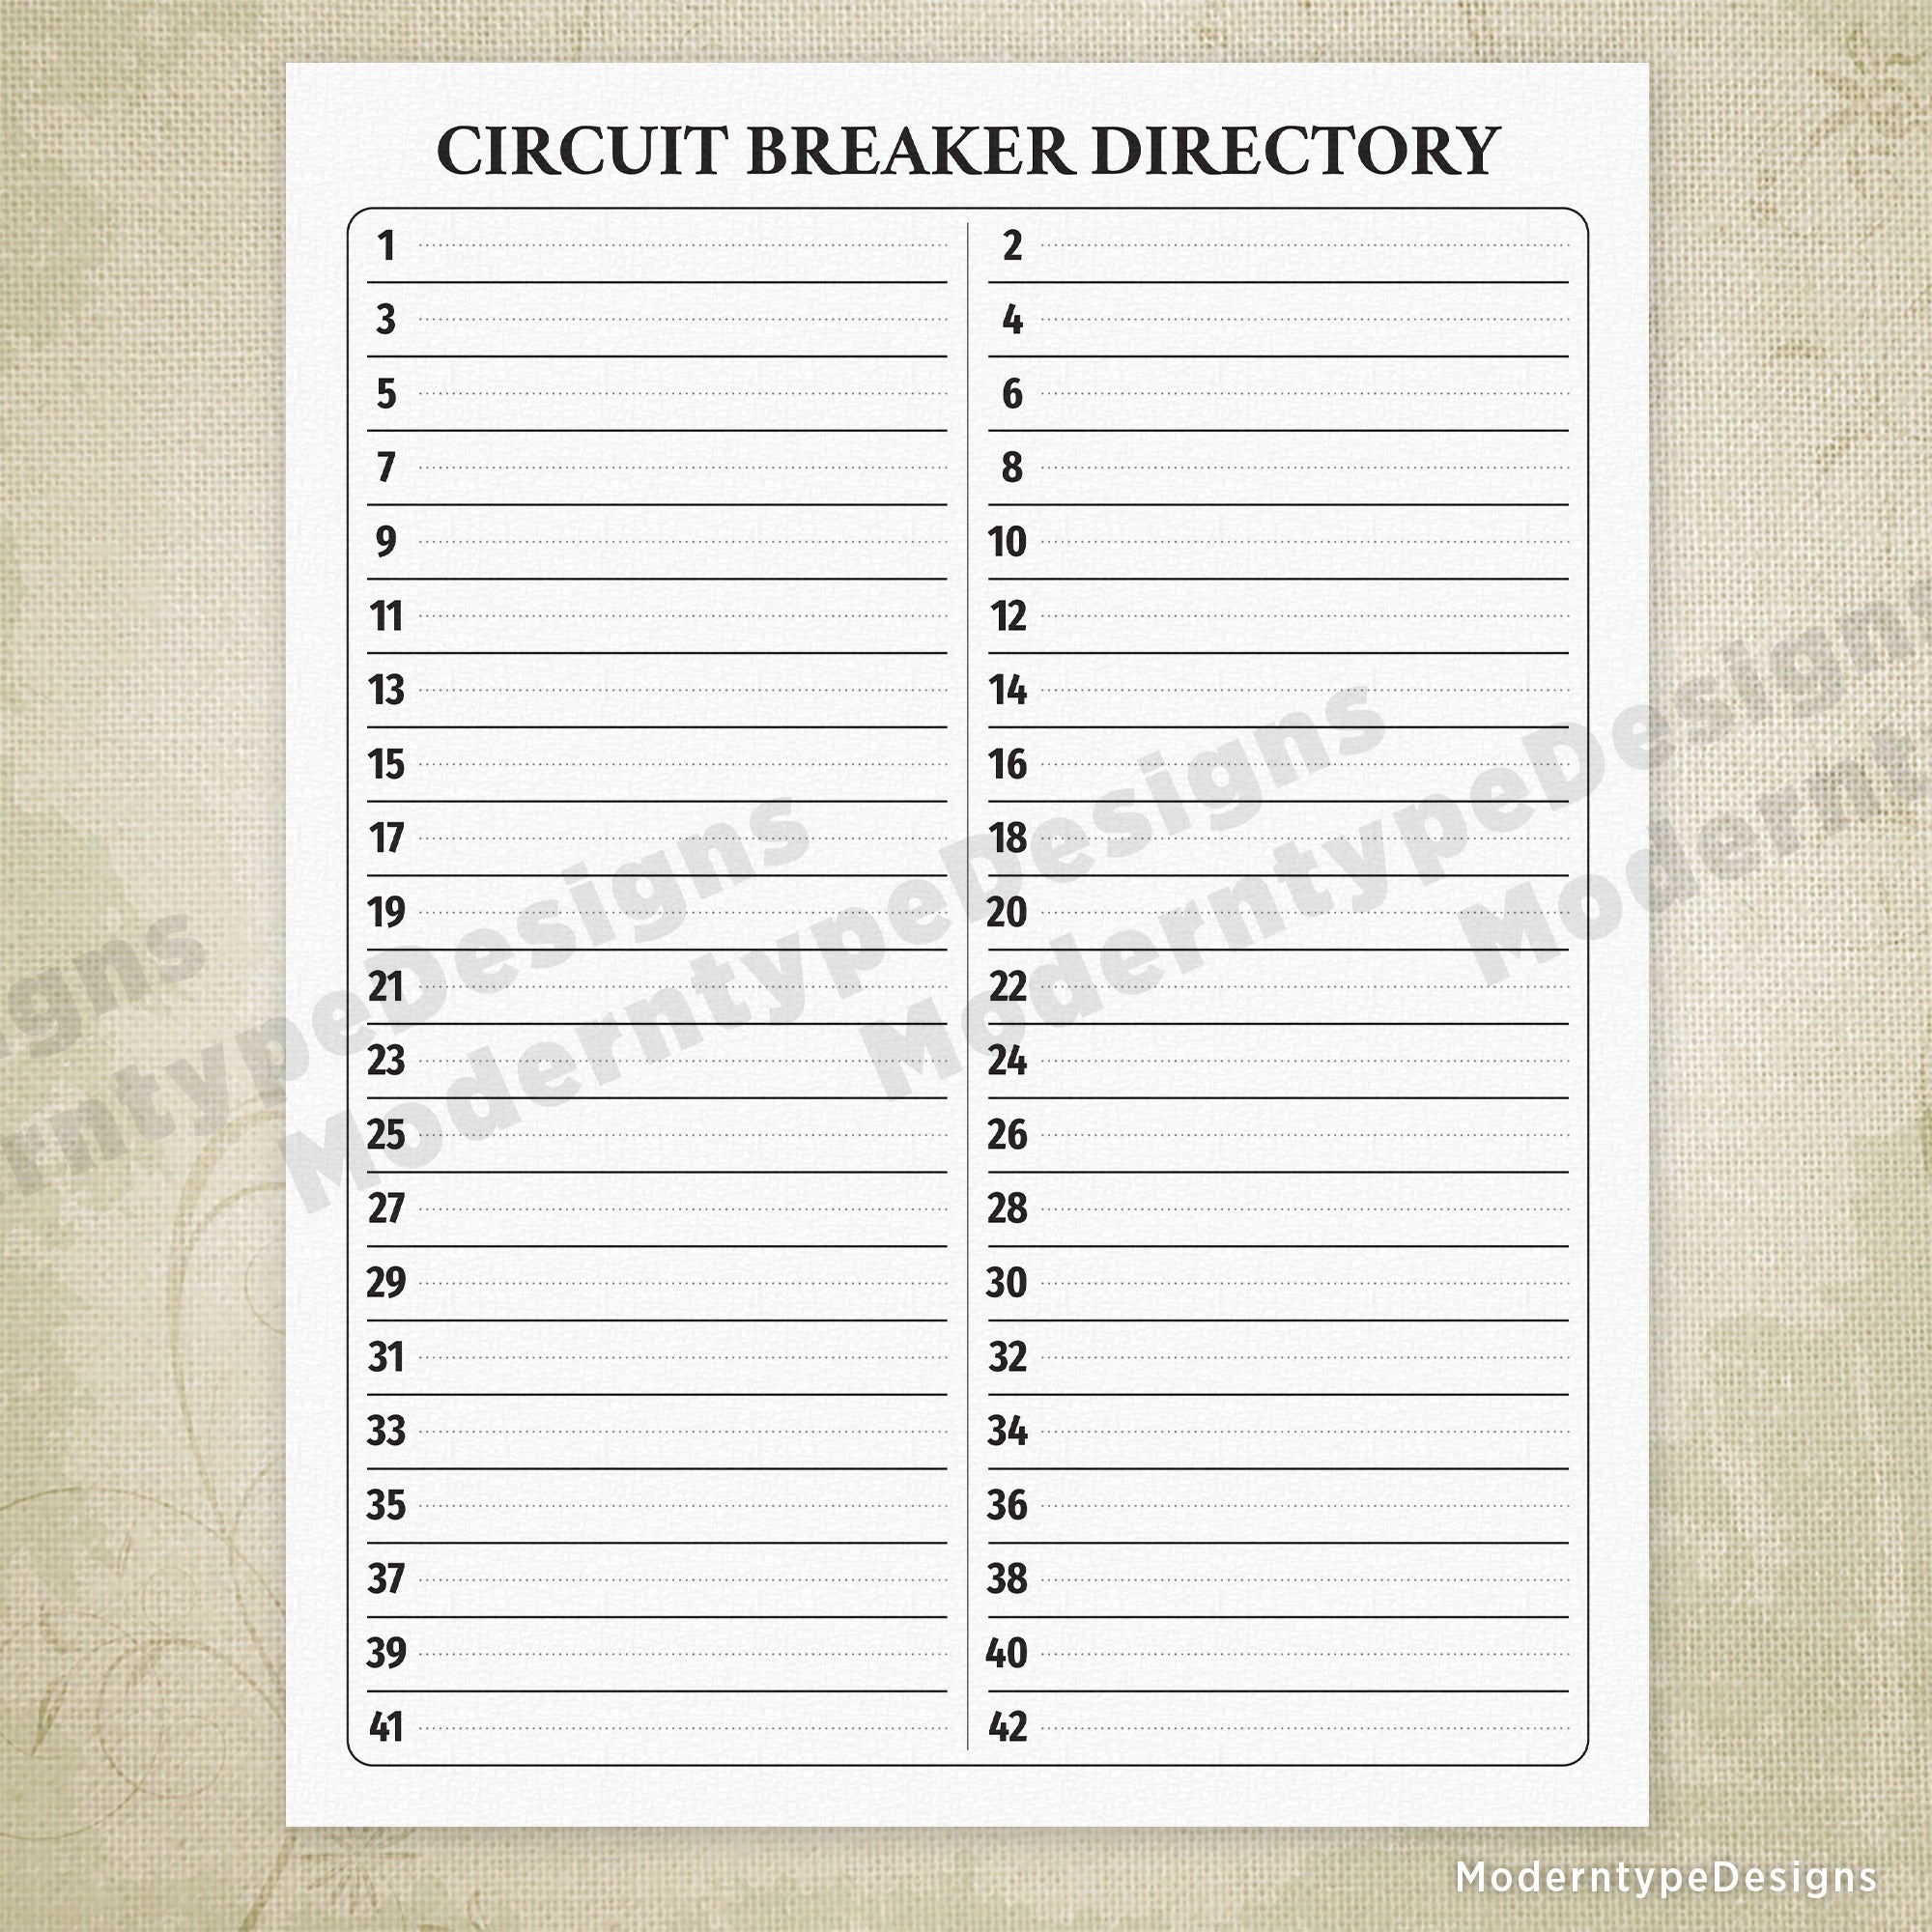 Breaker Directory Printable with 42 Circuits